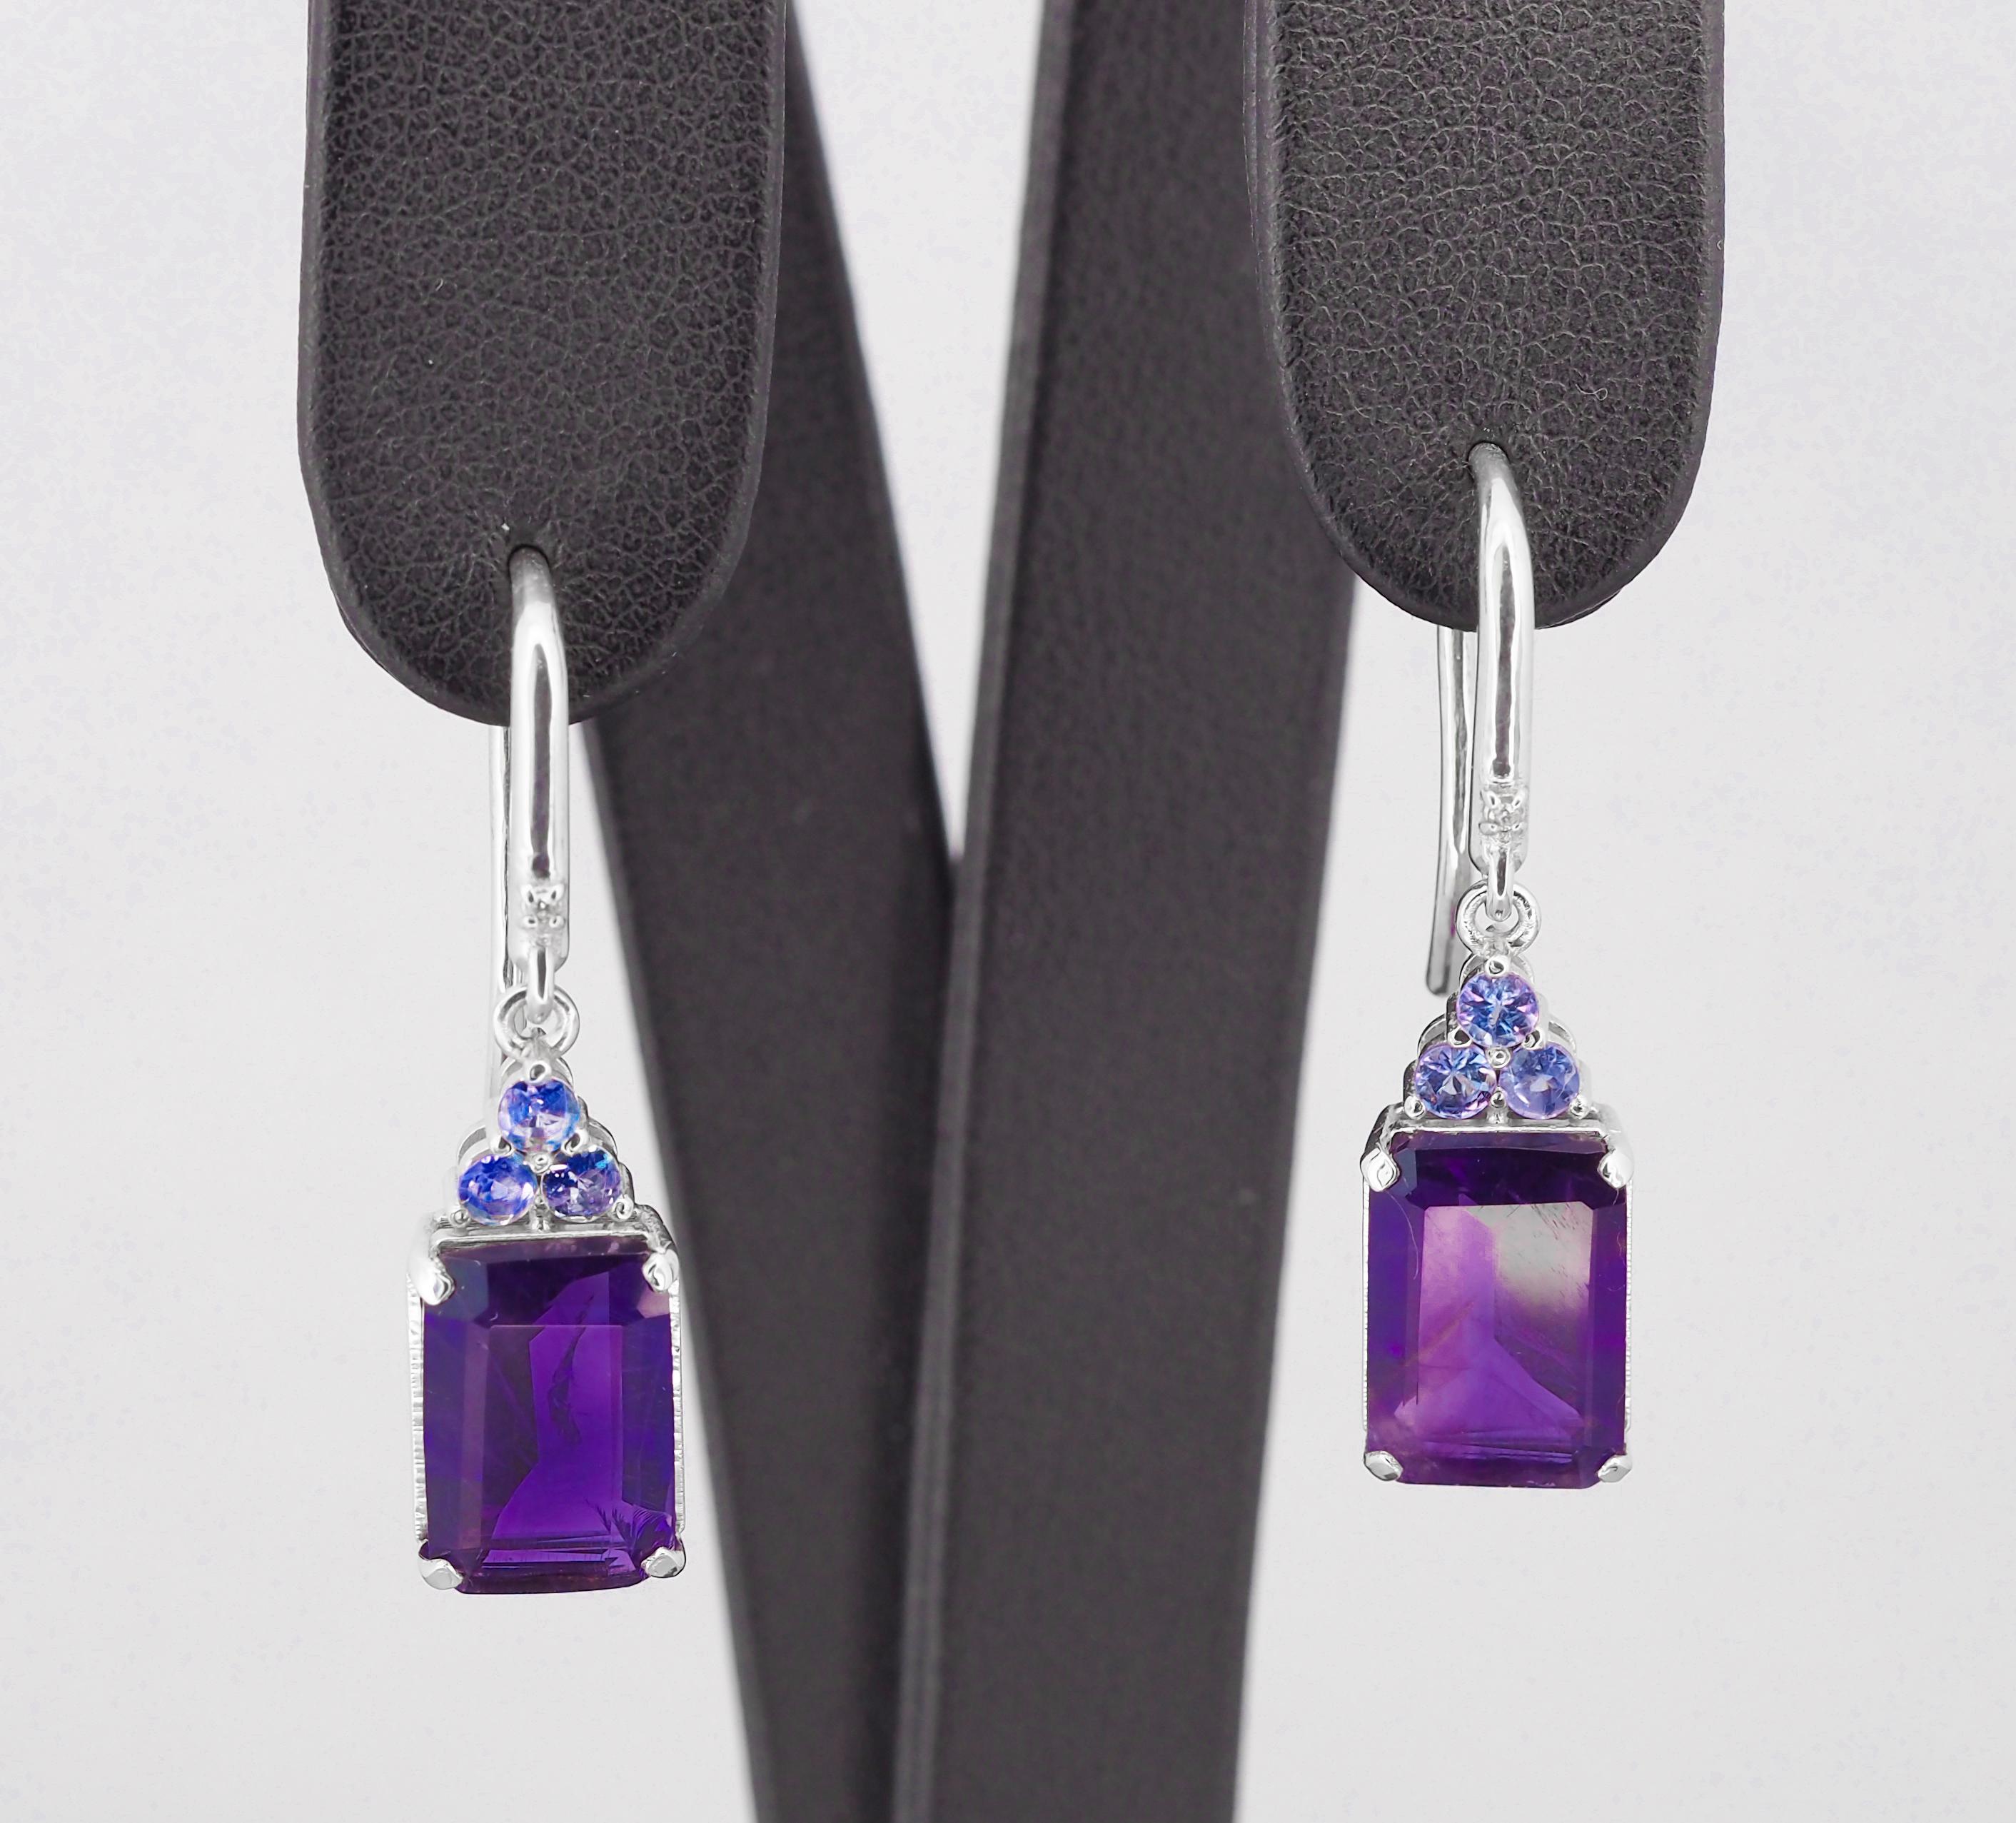 14 kt white solid gold earrings with central  natural amethysts, tanzanites and diamonds. Febrary birthstone.

Weight: 5.3 g.
Size: 33 x 8.5 mm.

Central sotnes: Natural amethysts, color - violet.
Weight: approx 6.00 ct in total, emerald